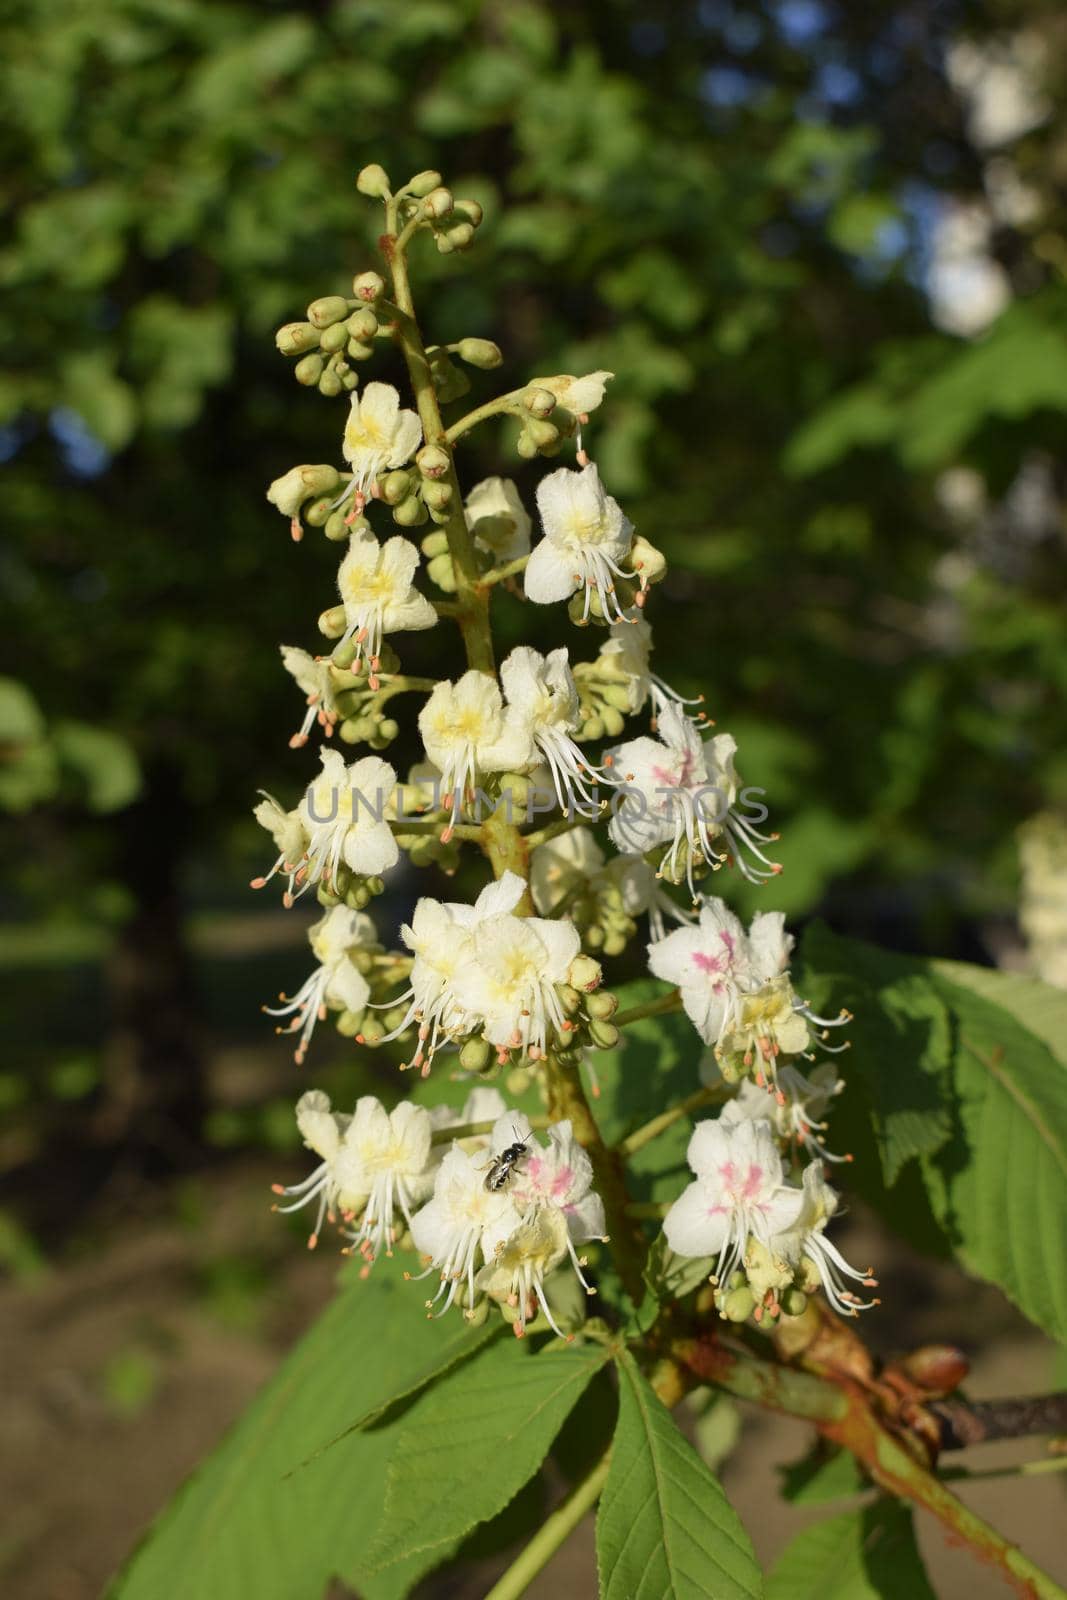 Foliage and flowers of chestnut (Aesculus hippocastanum). Horse-chestnut (Conker tree) flowers, leaf. Spring blossoming chestnut tree flowers.